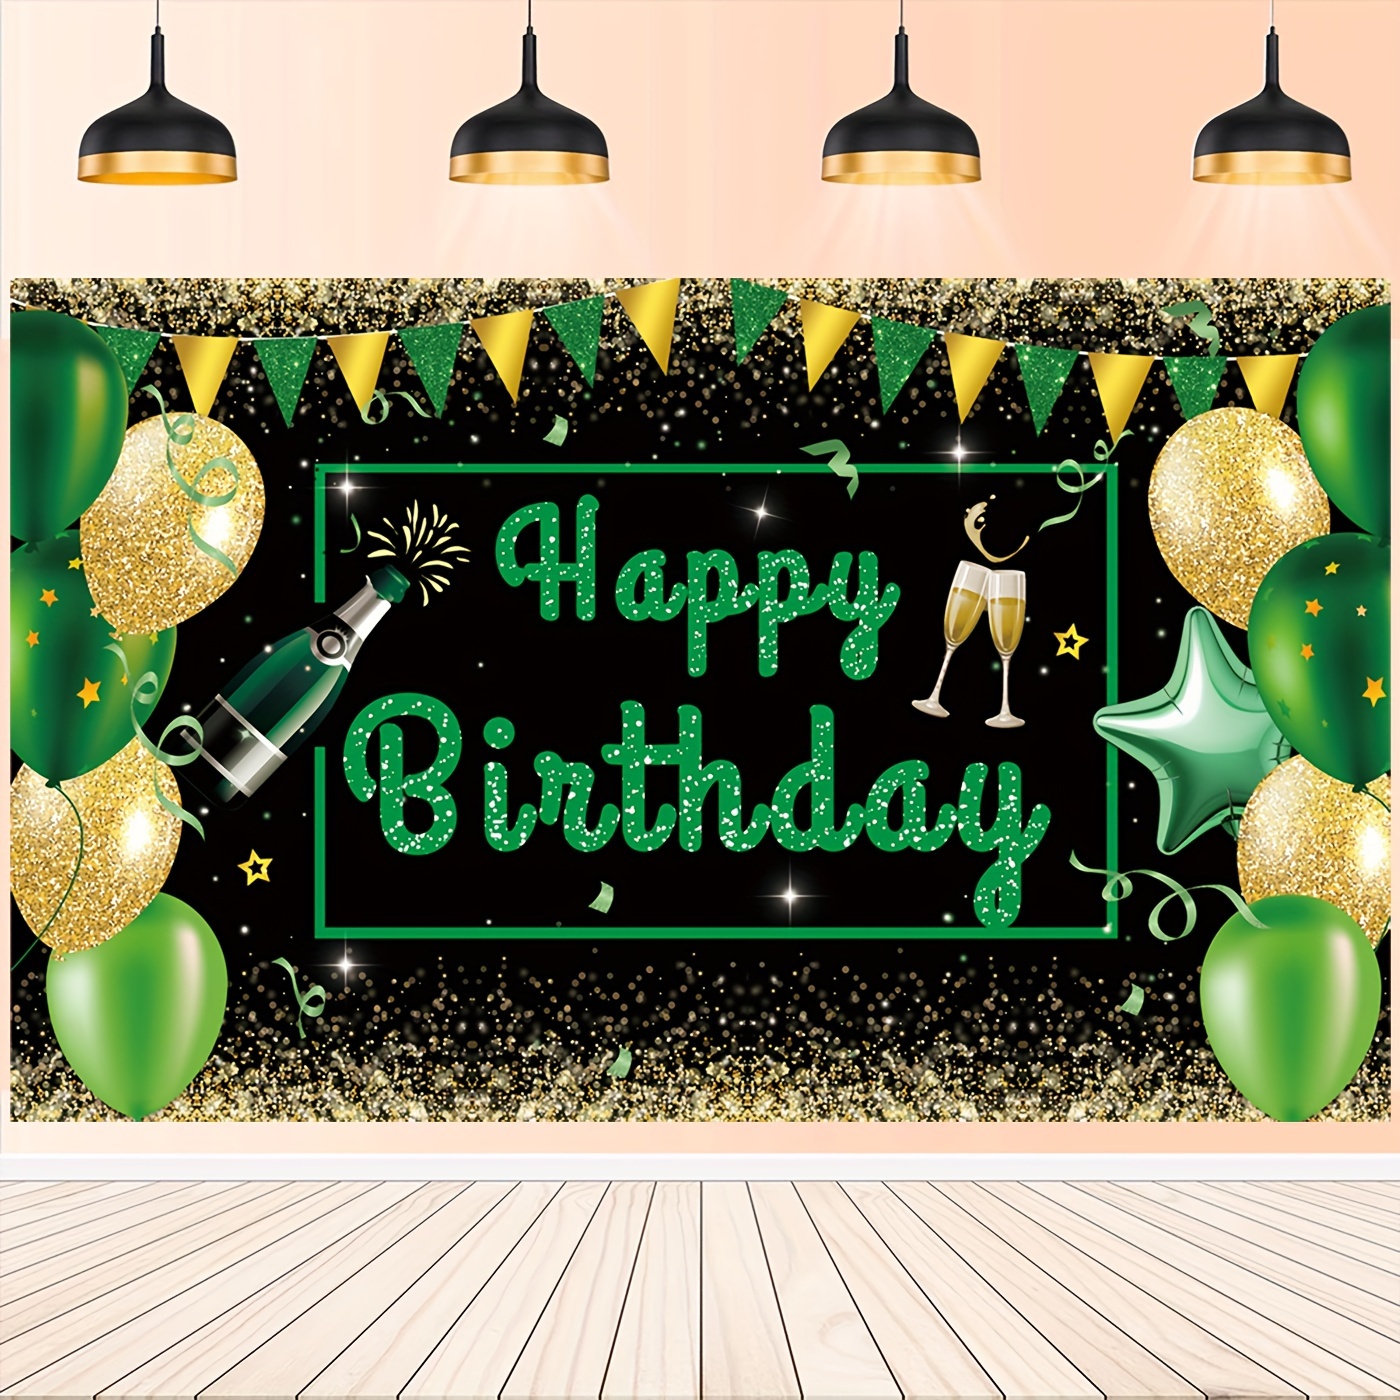  Green and Black Party Decorations, Green Birthday Decorations  for Men Women Boys Girls with Green Happy Birthday Banner Tablecloth Fringe  Curtains Streamers Confetti Balloons, Green Party Supplies : Toys & Games